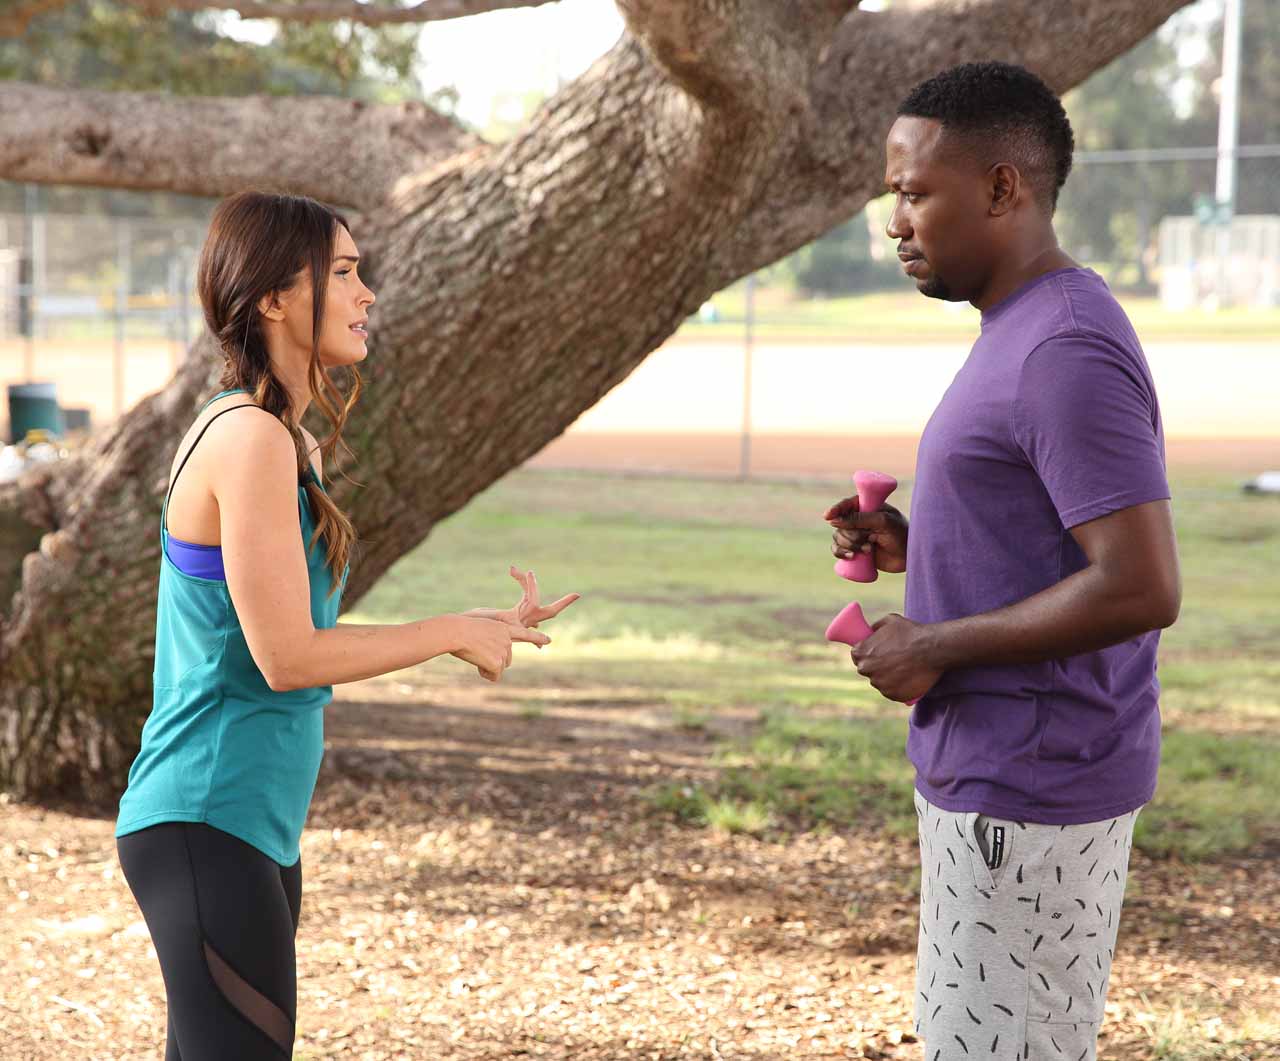 NEW GIRL: L-R: Guest star Megan Fox and Lamorne Morris in the "Wig" episode of NEW GIRL airing Tuesday, Feb. 16 (8:00-8:30 PM ET/PT) on FOX. Â©2016 Fox Broadcasting Co. Cr: Adam Taylor/FOX